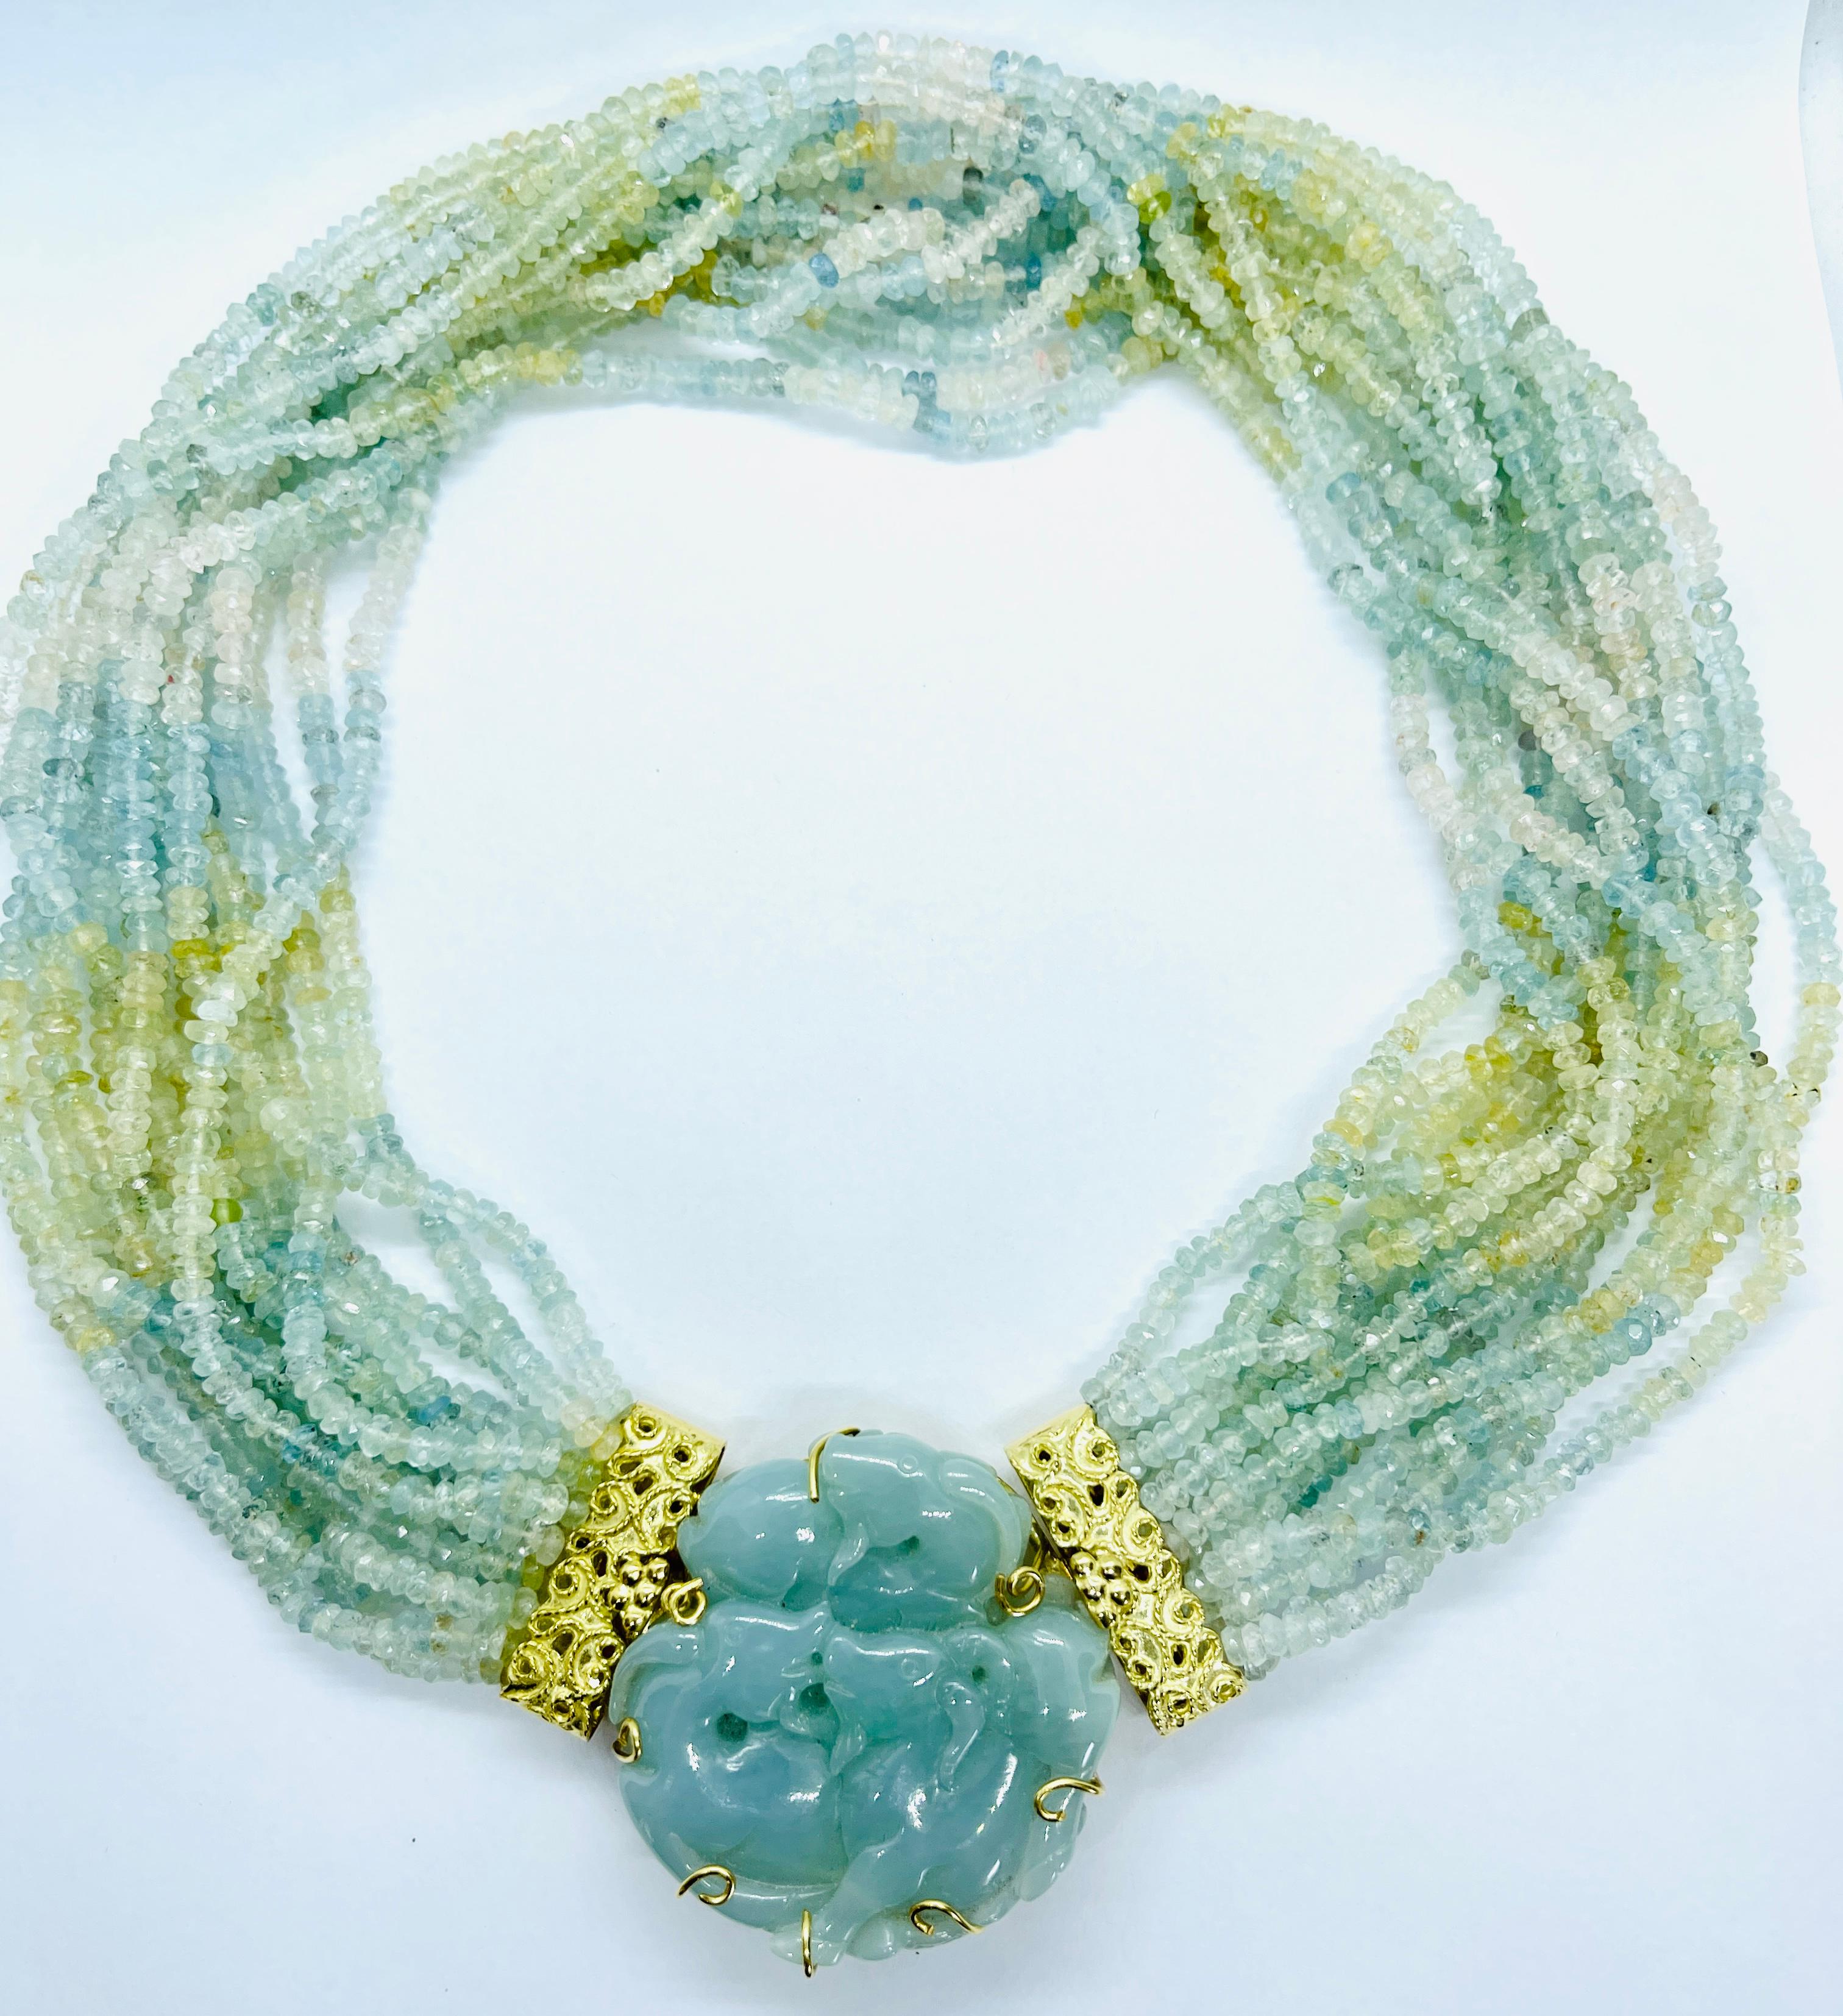 18K Yellow Gold & Jadeite Jade 16 Strand Necklace with Removable Pendant Brooch In Excellent Condition For Sale In Birmingham, AL